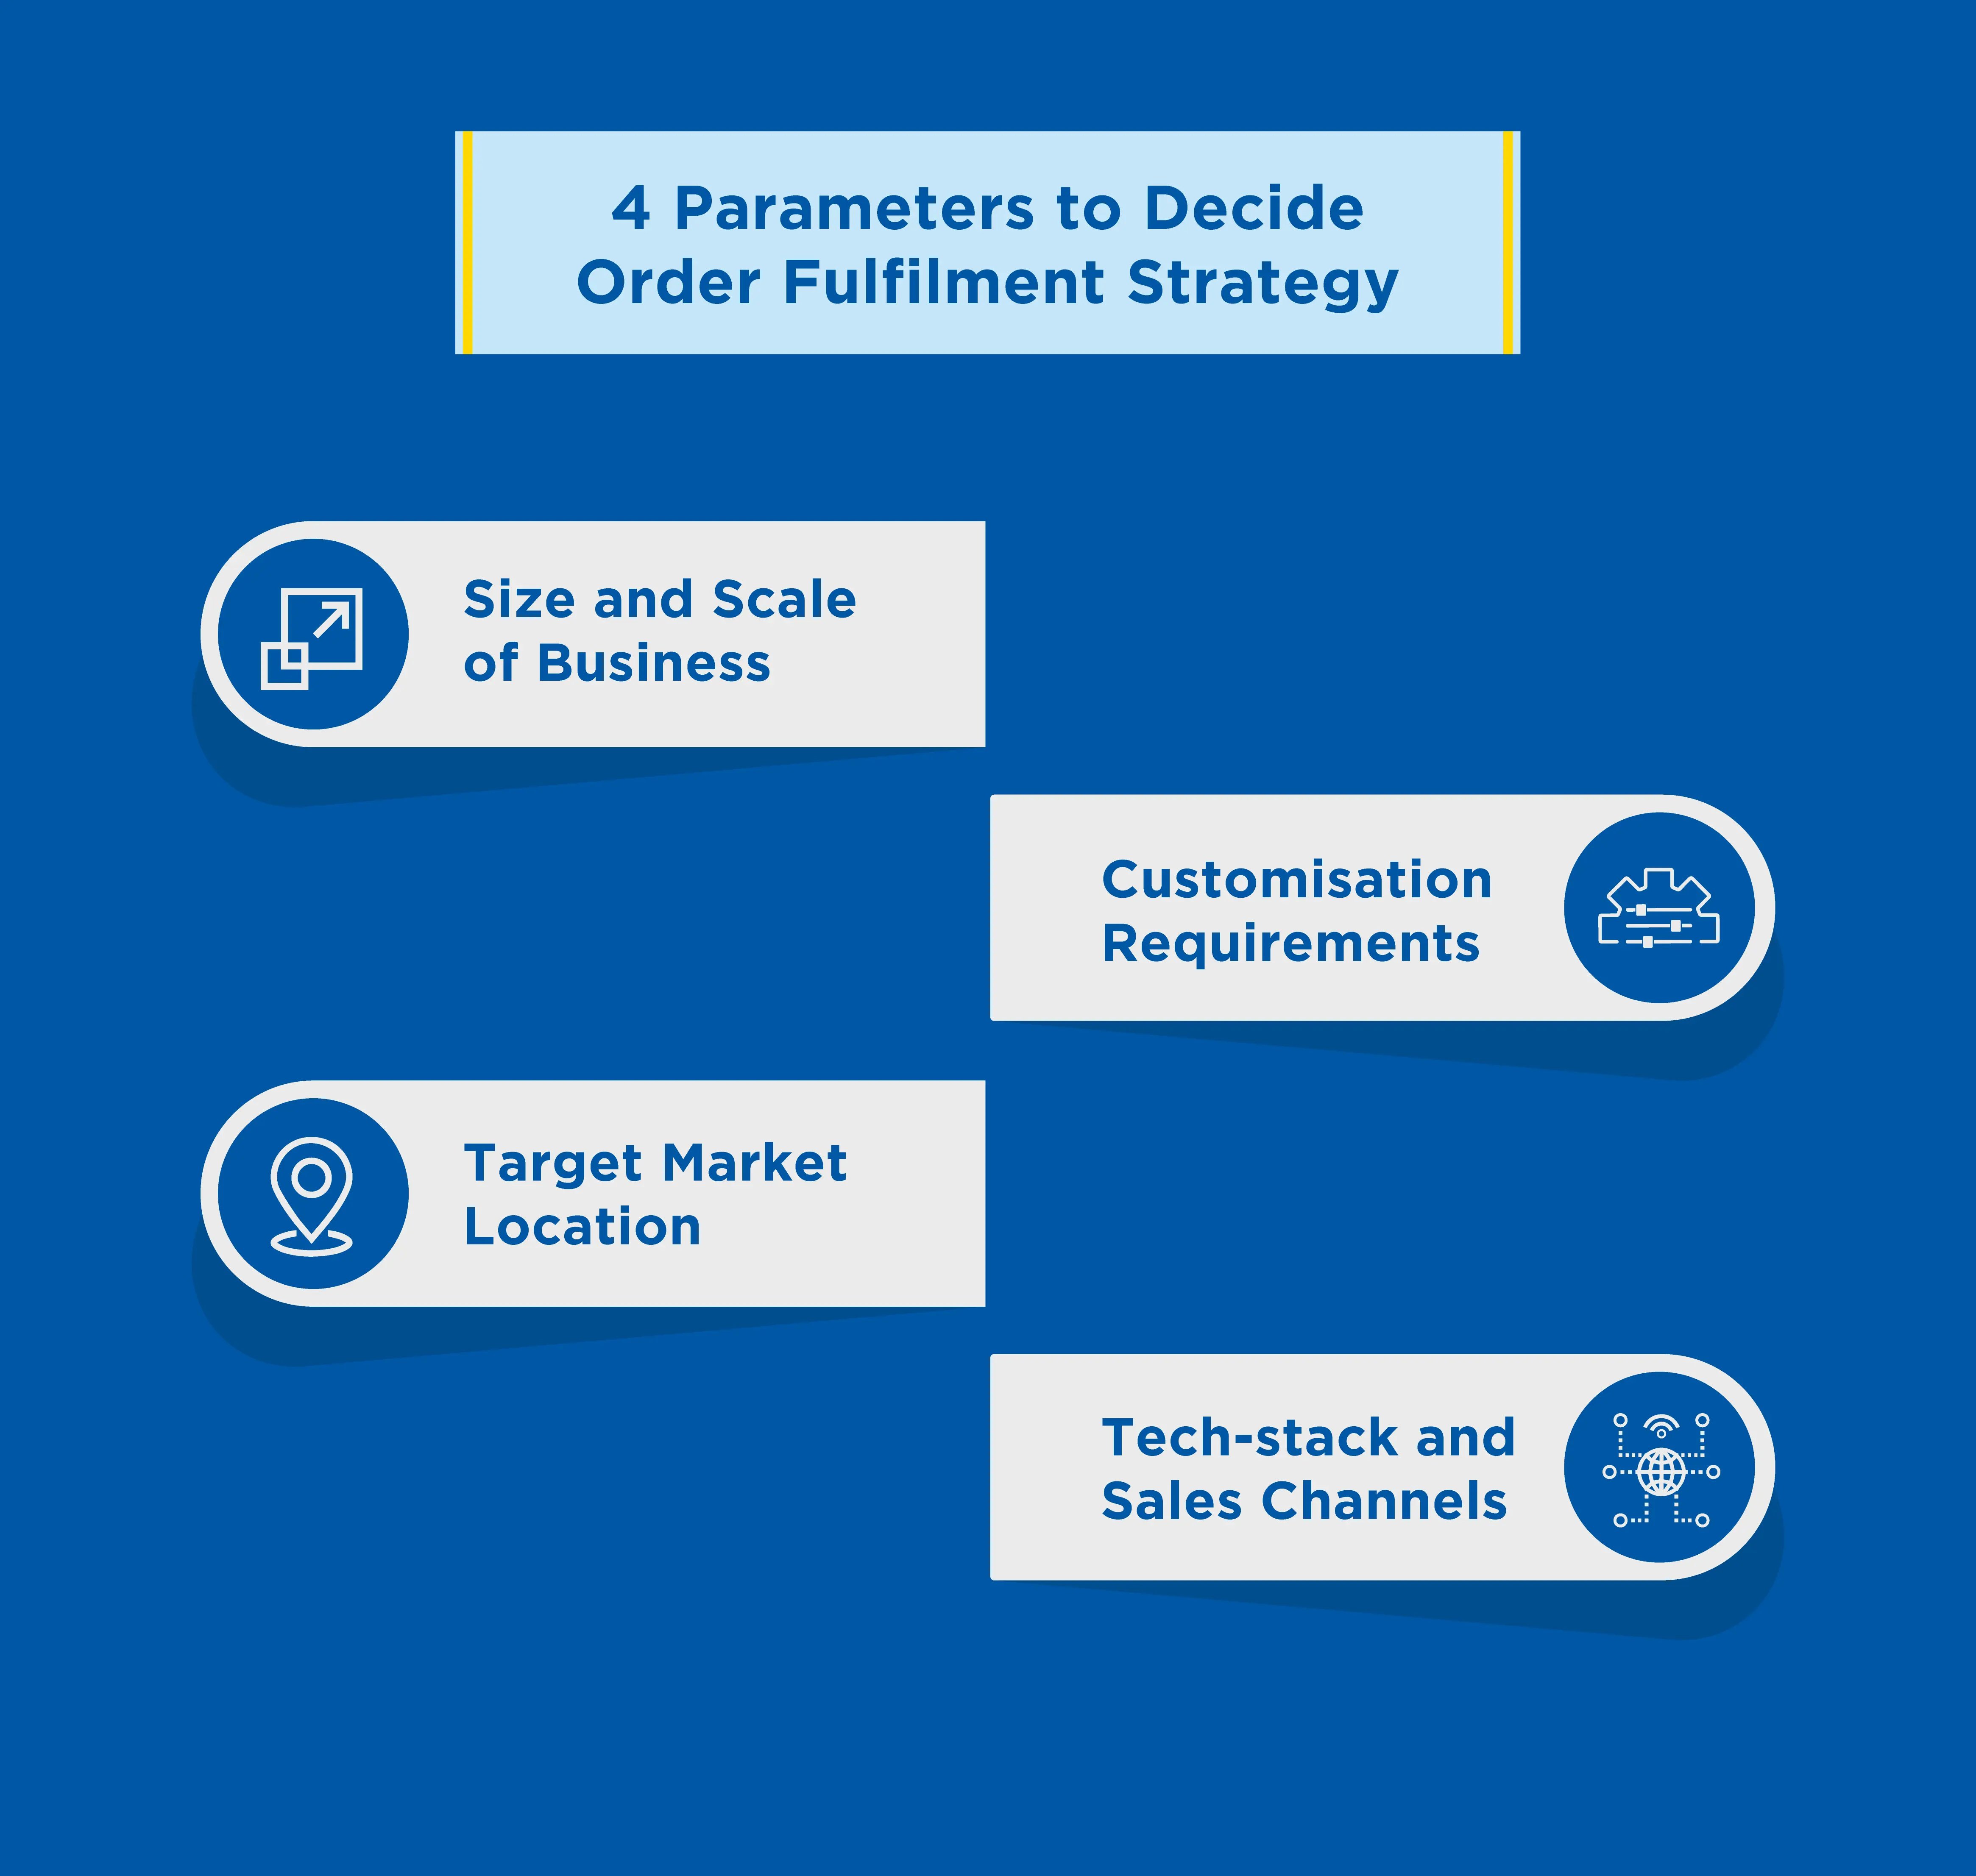 Parameters-to-decide-order-fulfillment-strategy